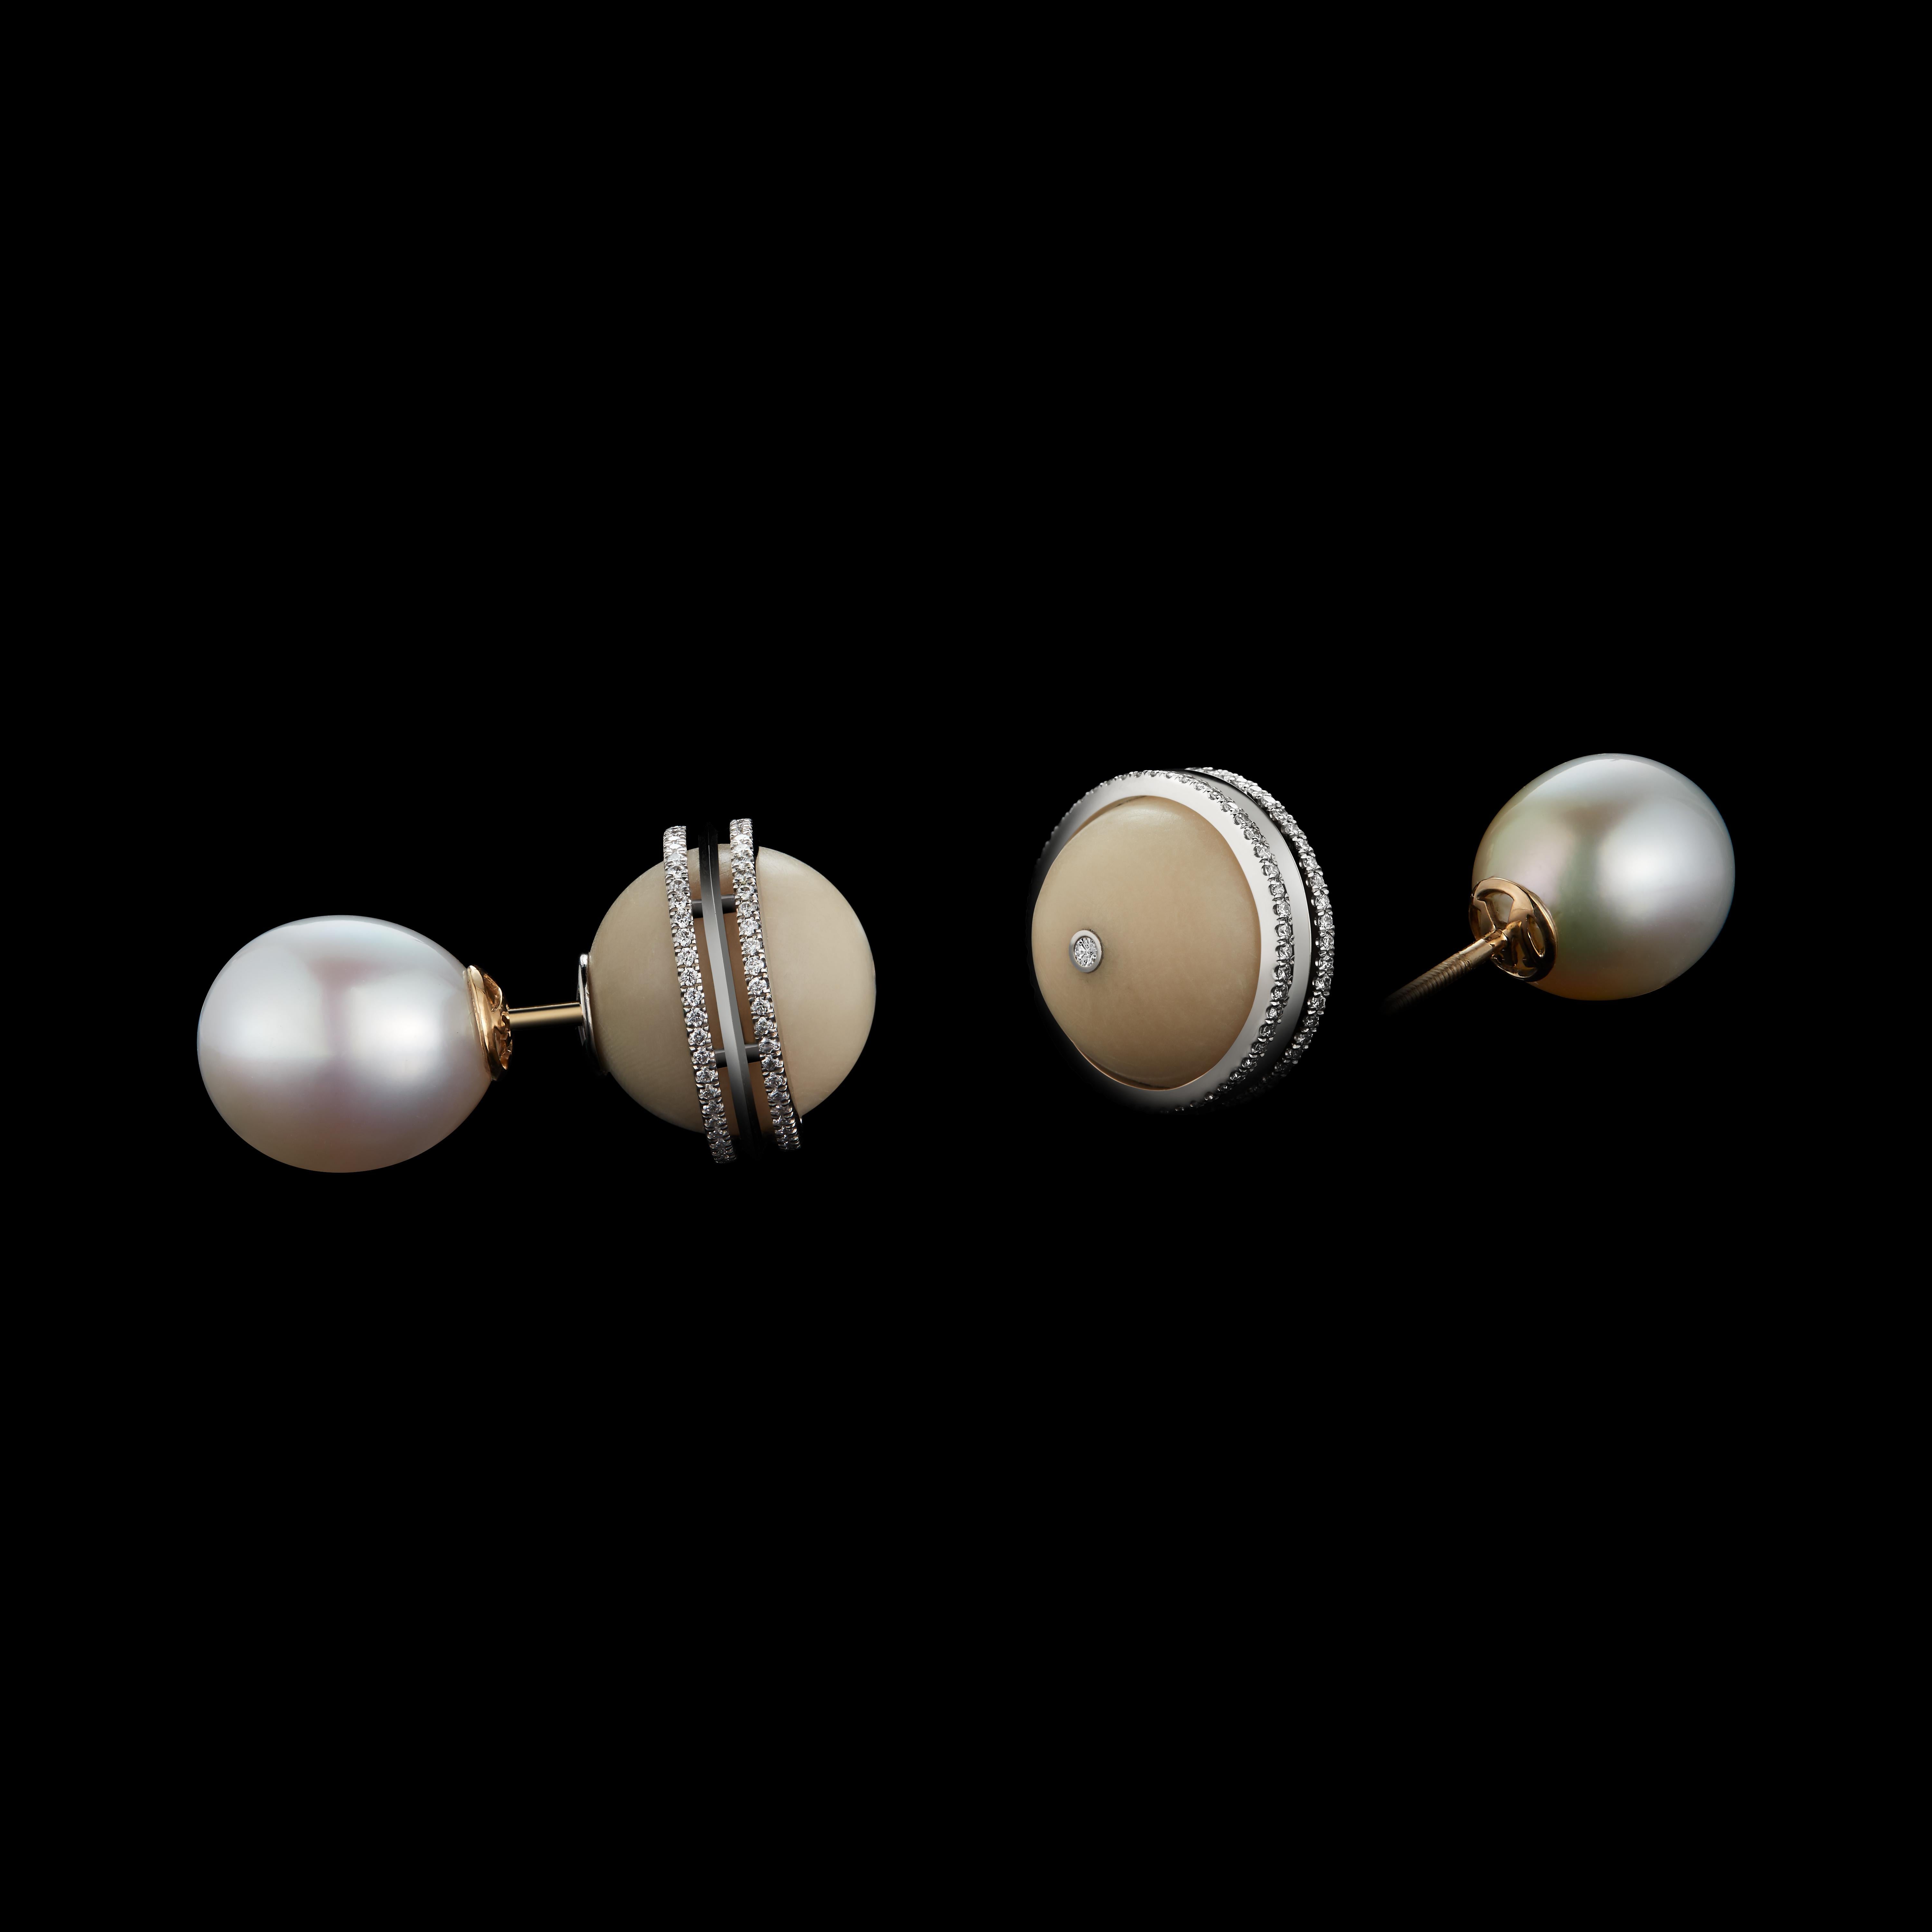 An Alexandra Mor One-Of-a-Kind double-sided stud earring featuring a pair of South Sea Pearls and 25.22 carats of Tagua Beads. Platinum set on 18 KY Gold Alexandra Mor logo gallery with Alexandra Mor's signature details of 1mm kinfe edged wire and